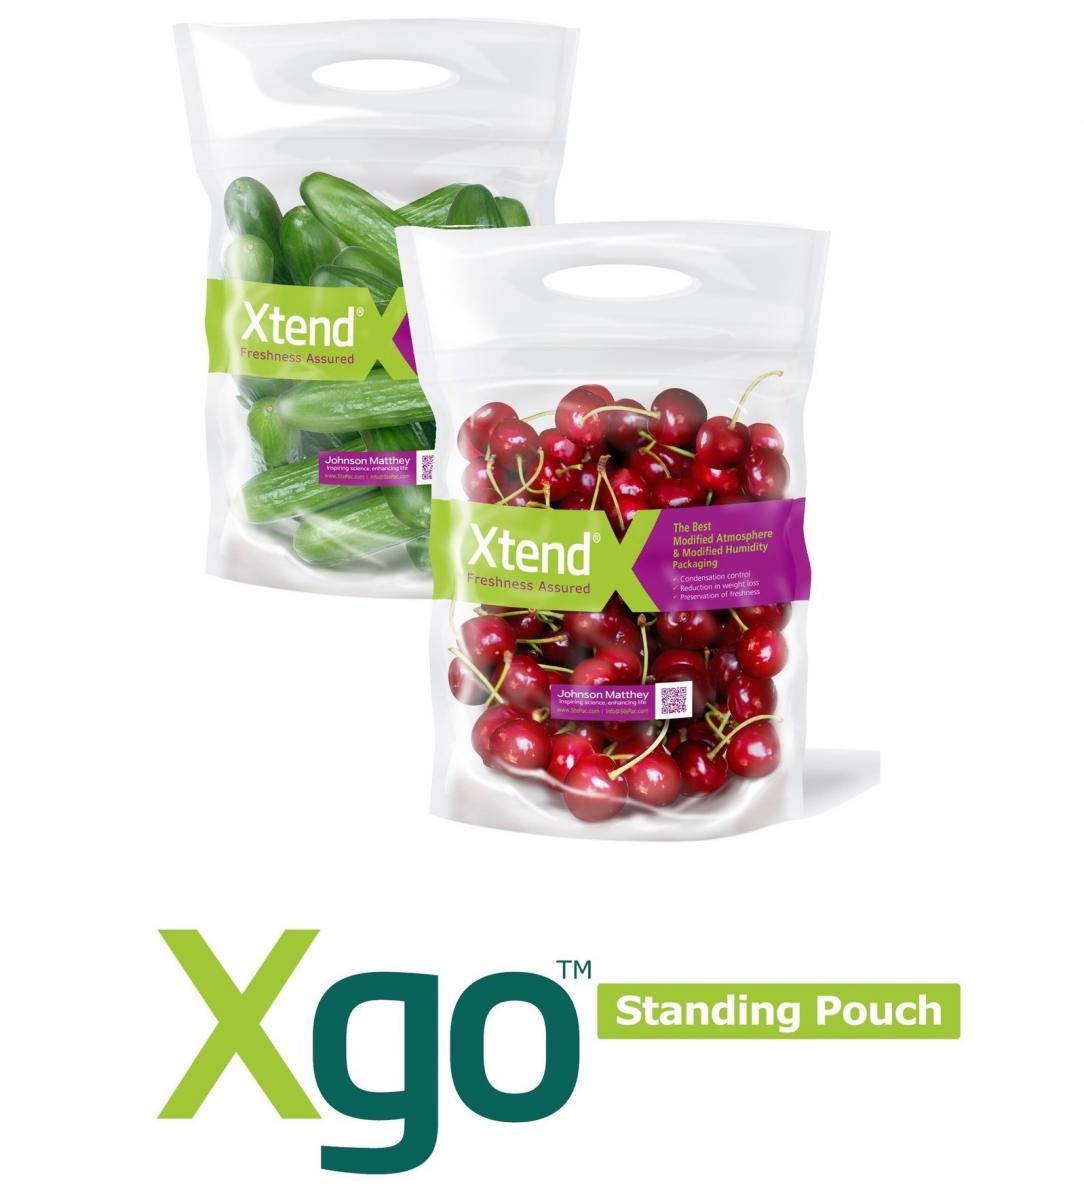 StePac helps retailers extend the shelf life of fresh produce with Xgo packaging